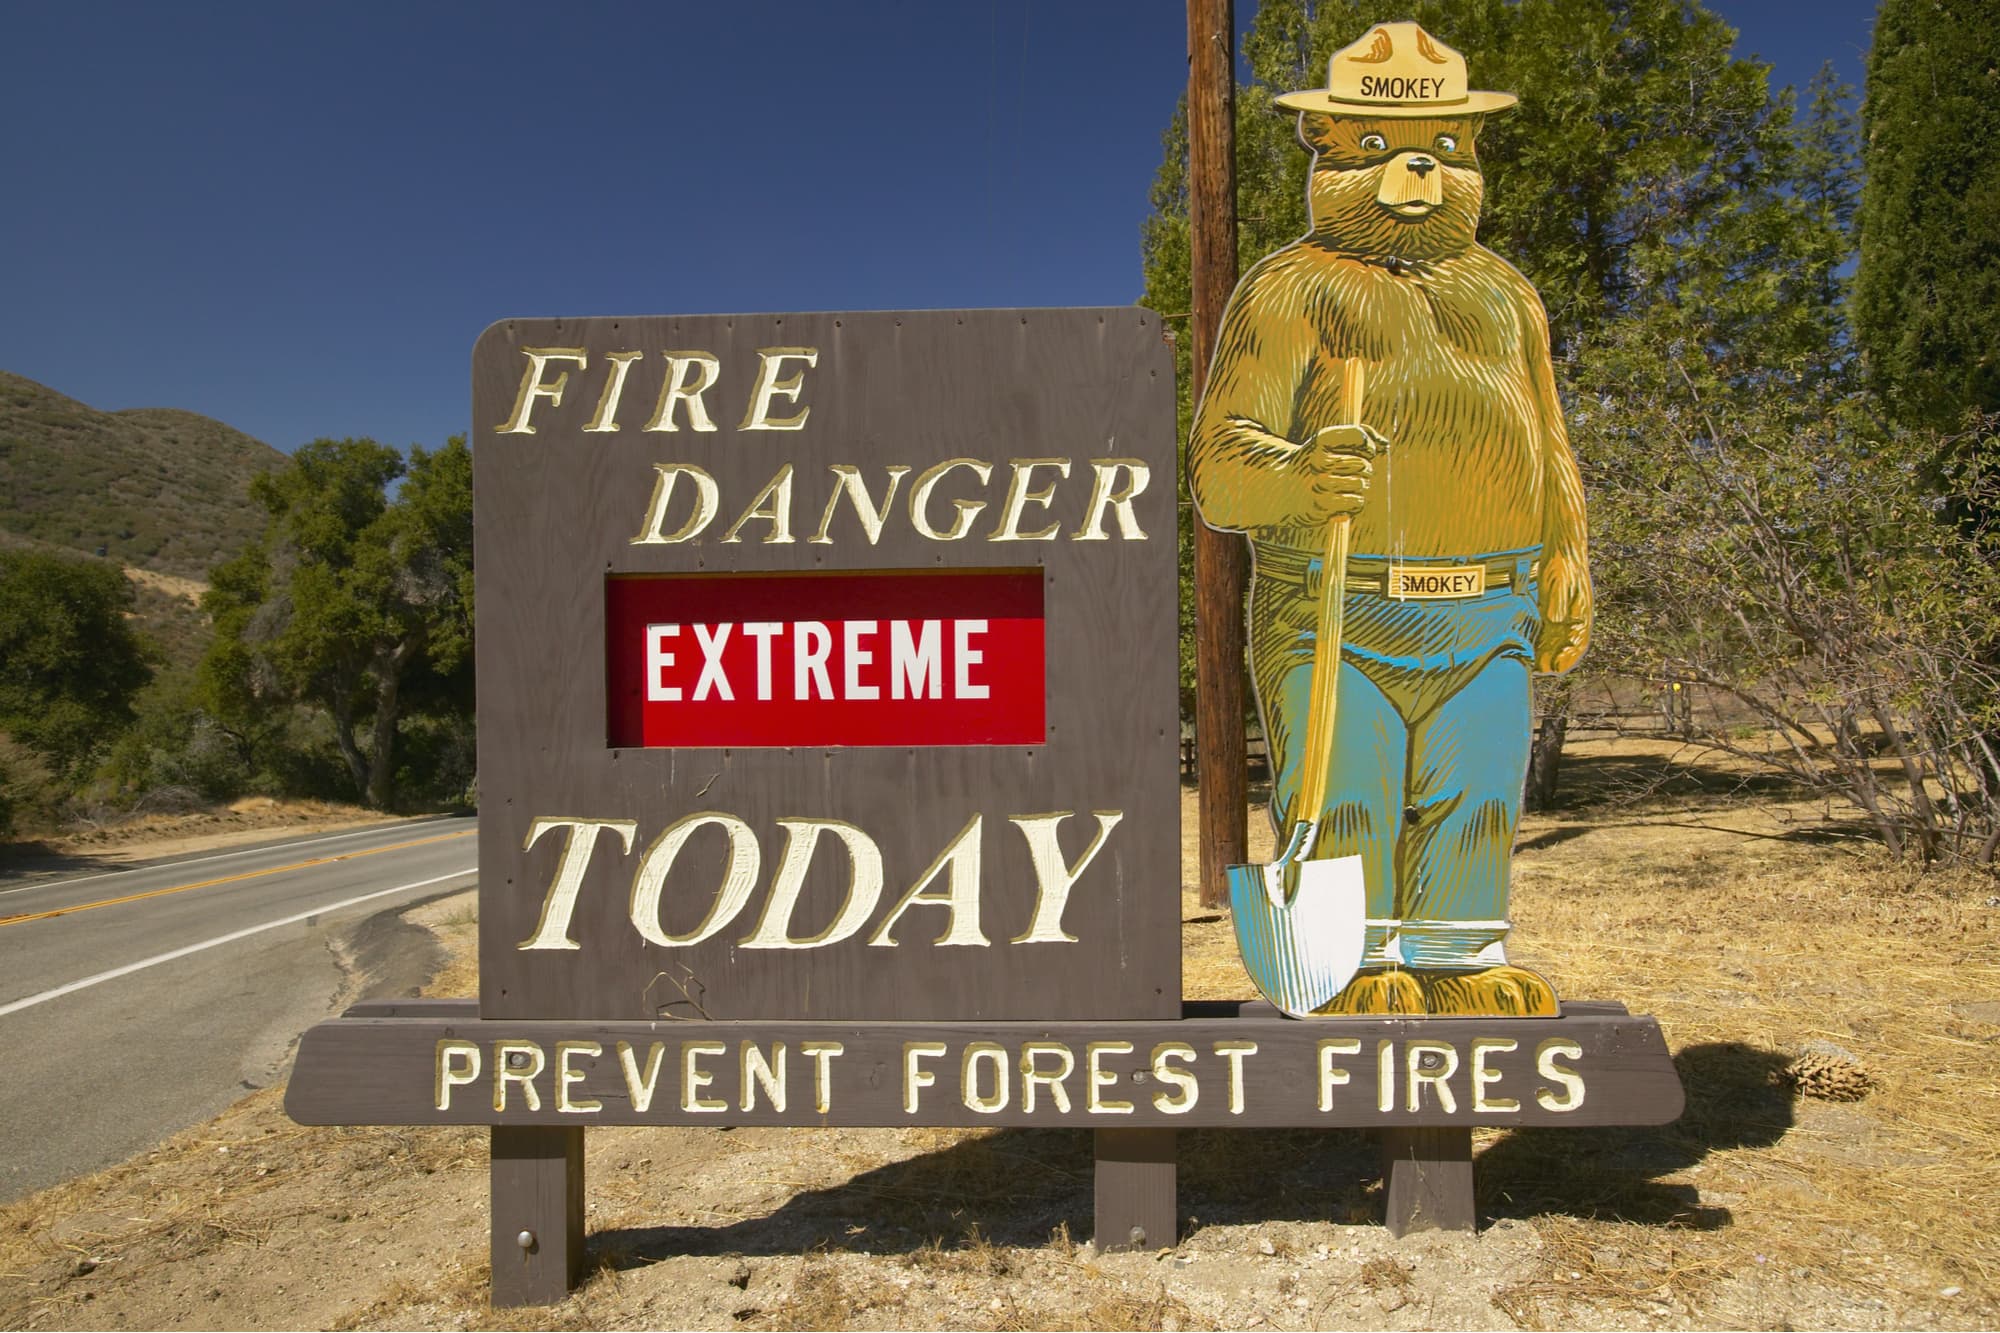 a sign with smoky the bear showing the fire danger in the forest